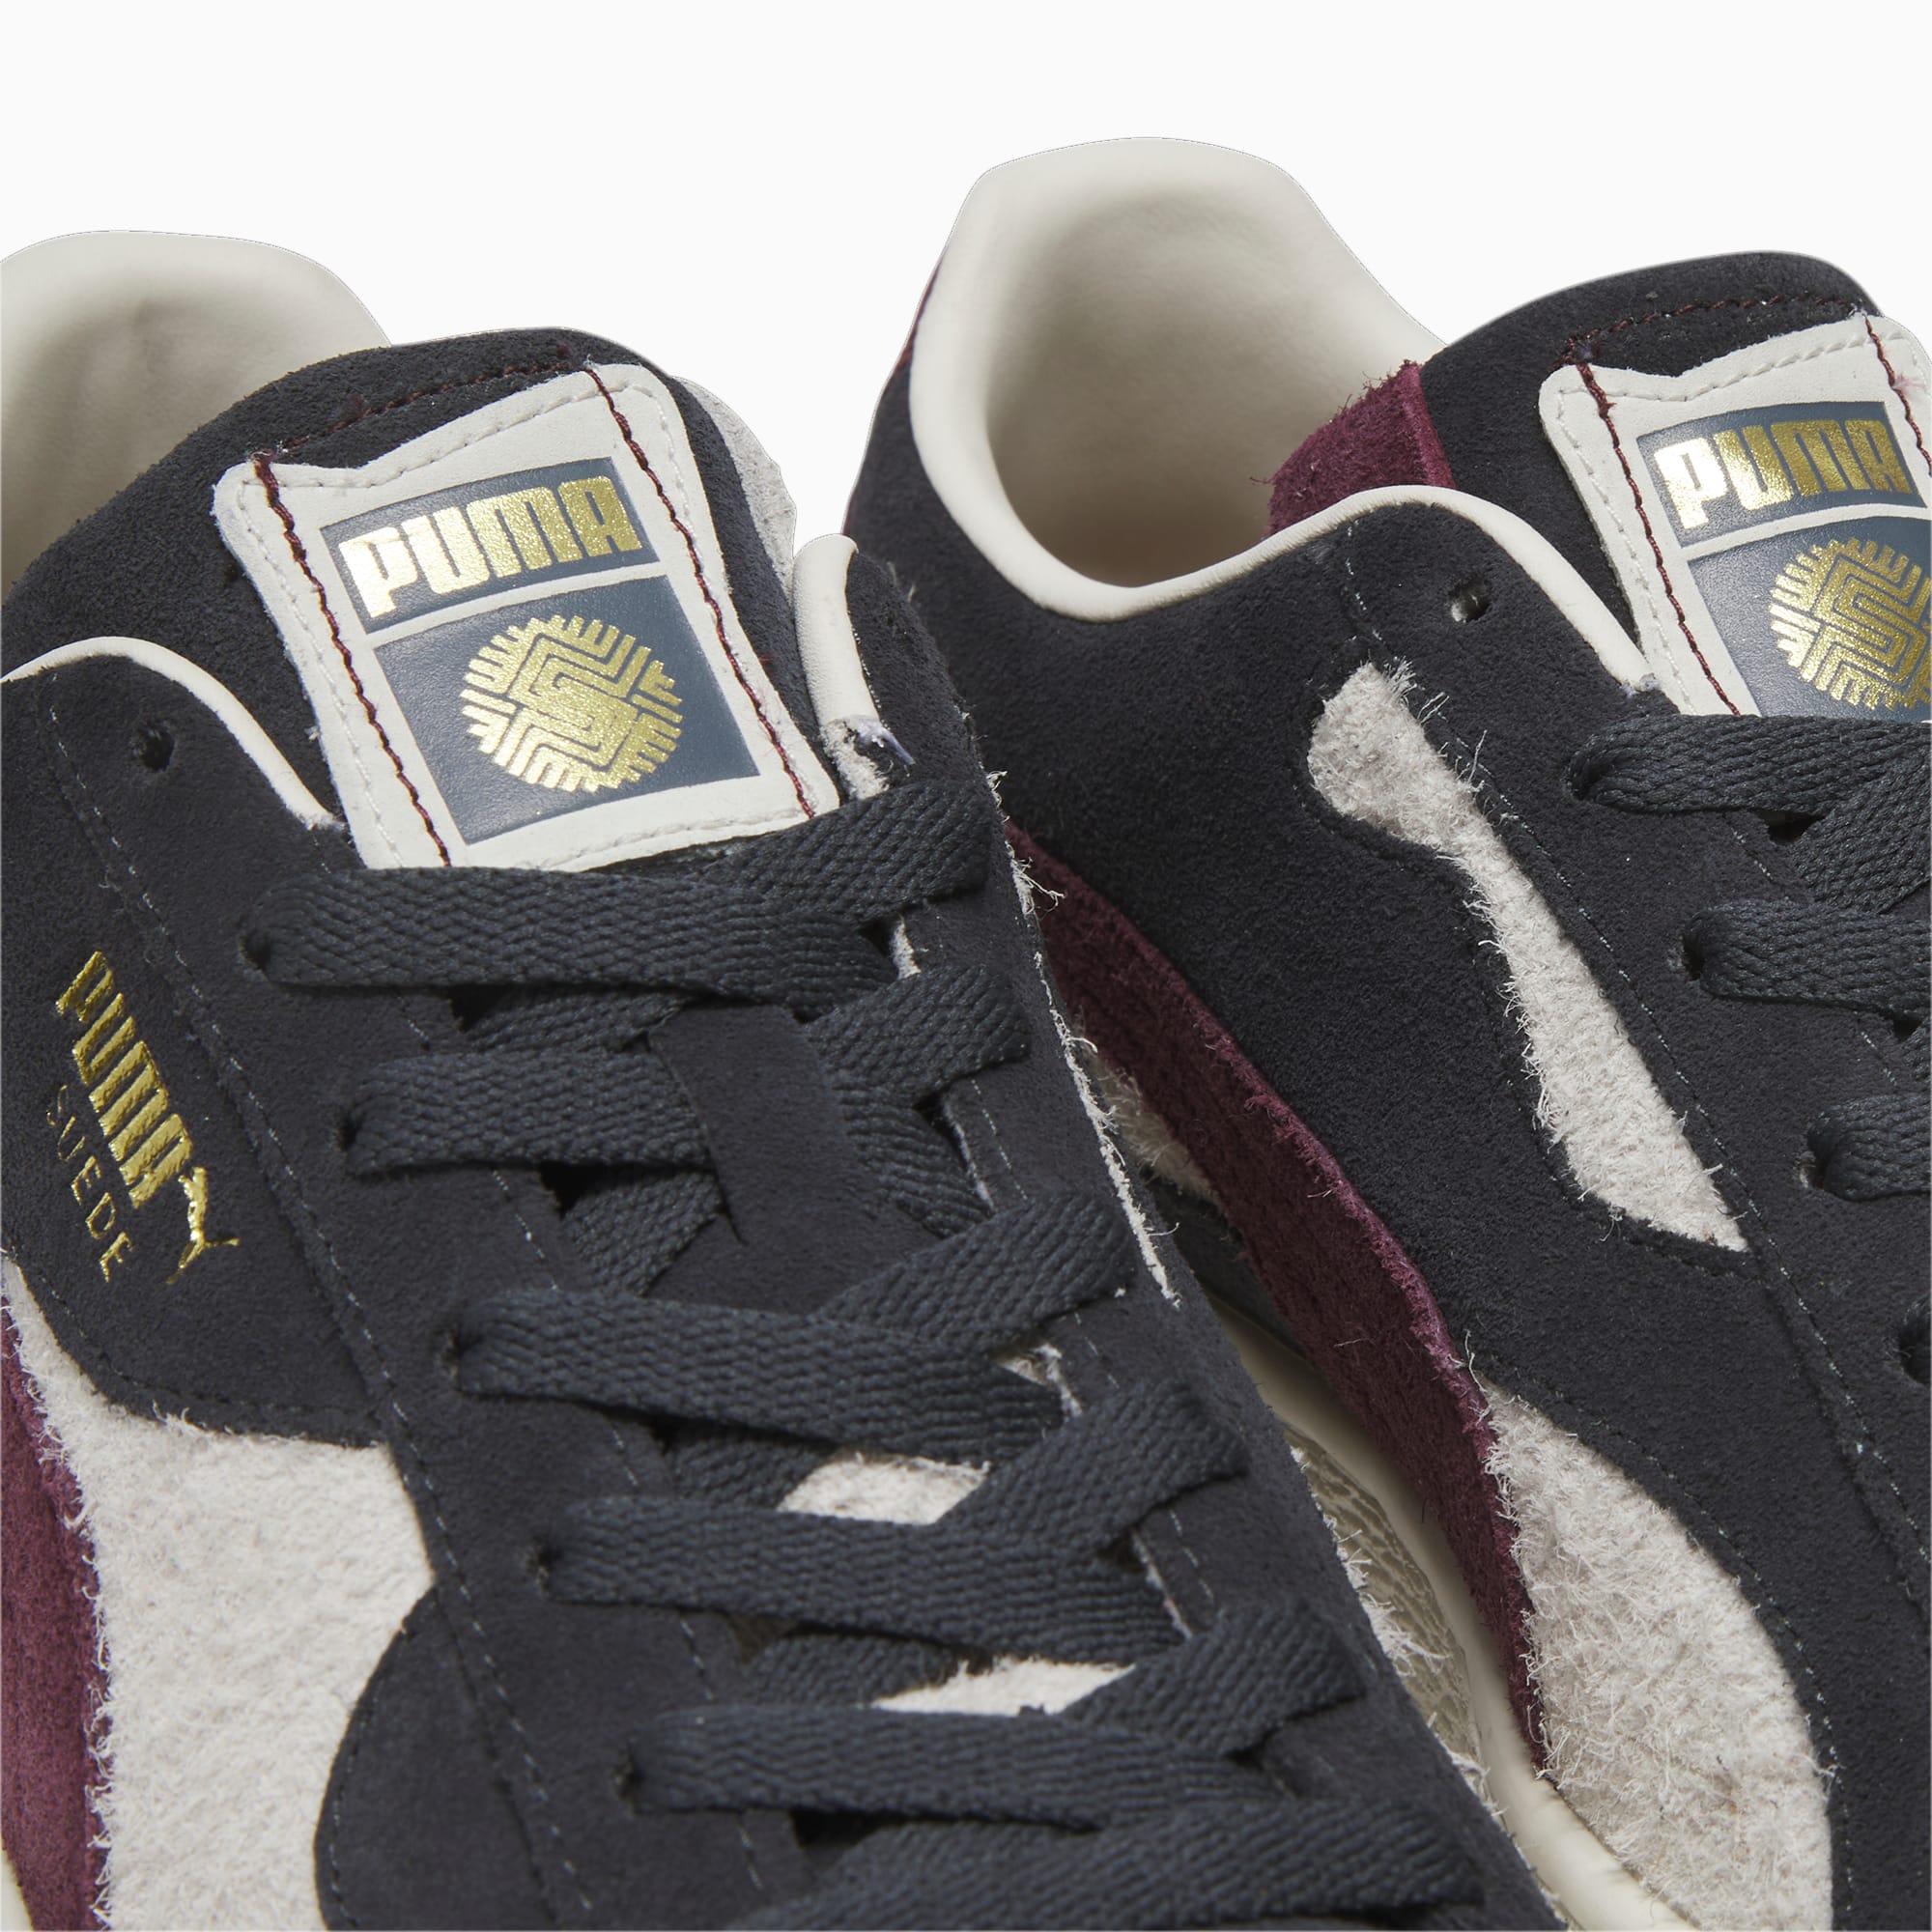 Suede Camowave We Are Legends Deeply Rooted Sneakers